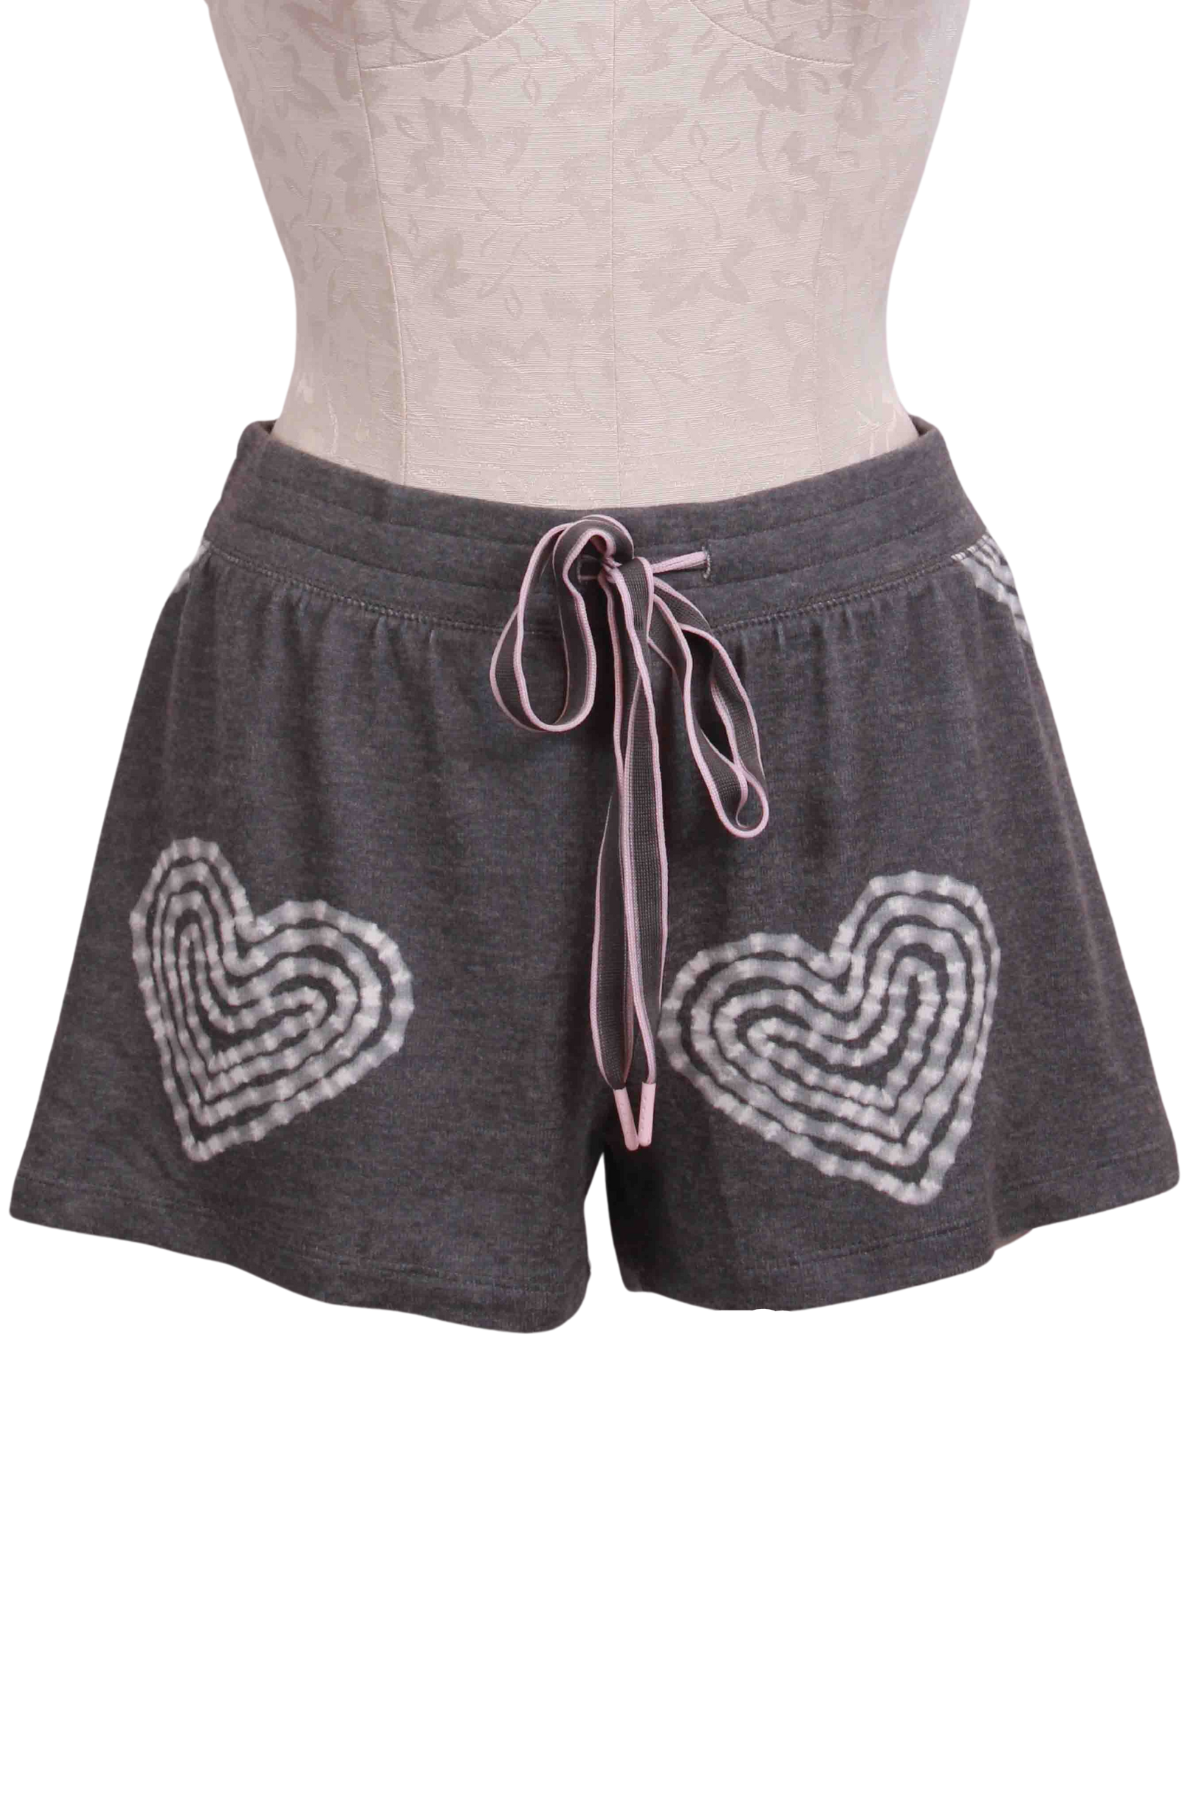 Heather Charcoal Bless Your Heart Short by PJ Salvage